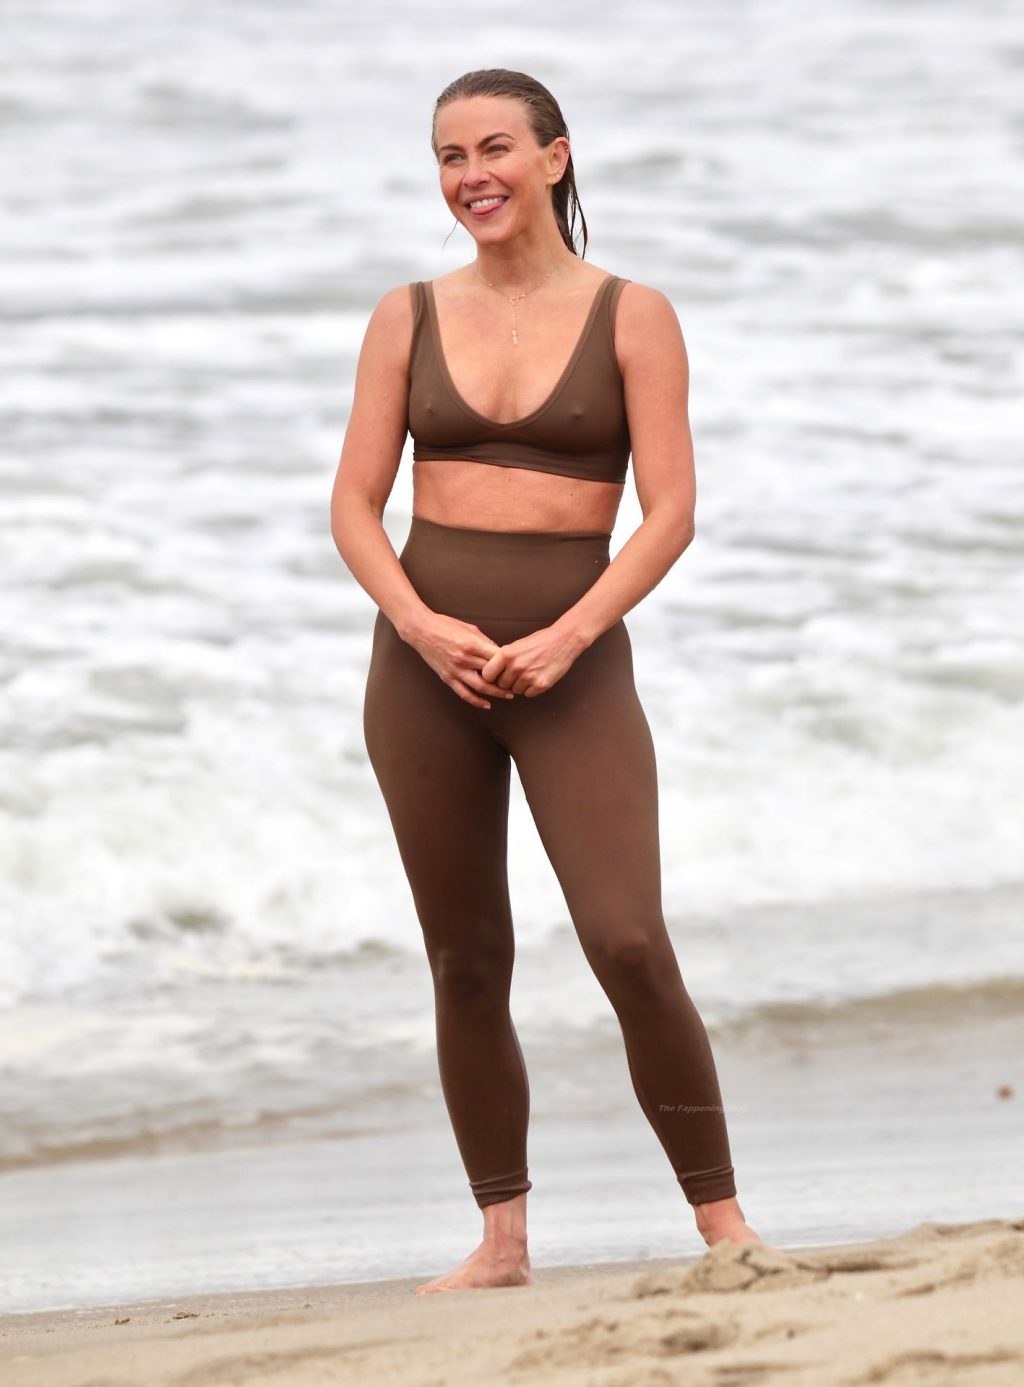 Julianne Hough Shows Off Her Pokies on the Beach (29 Photos)